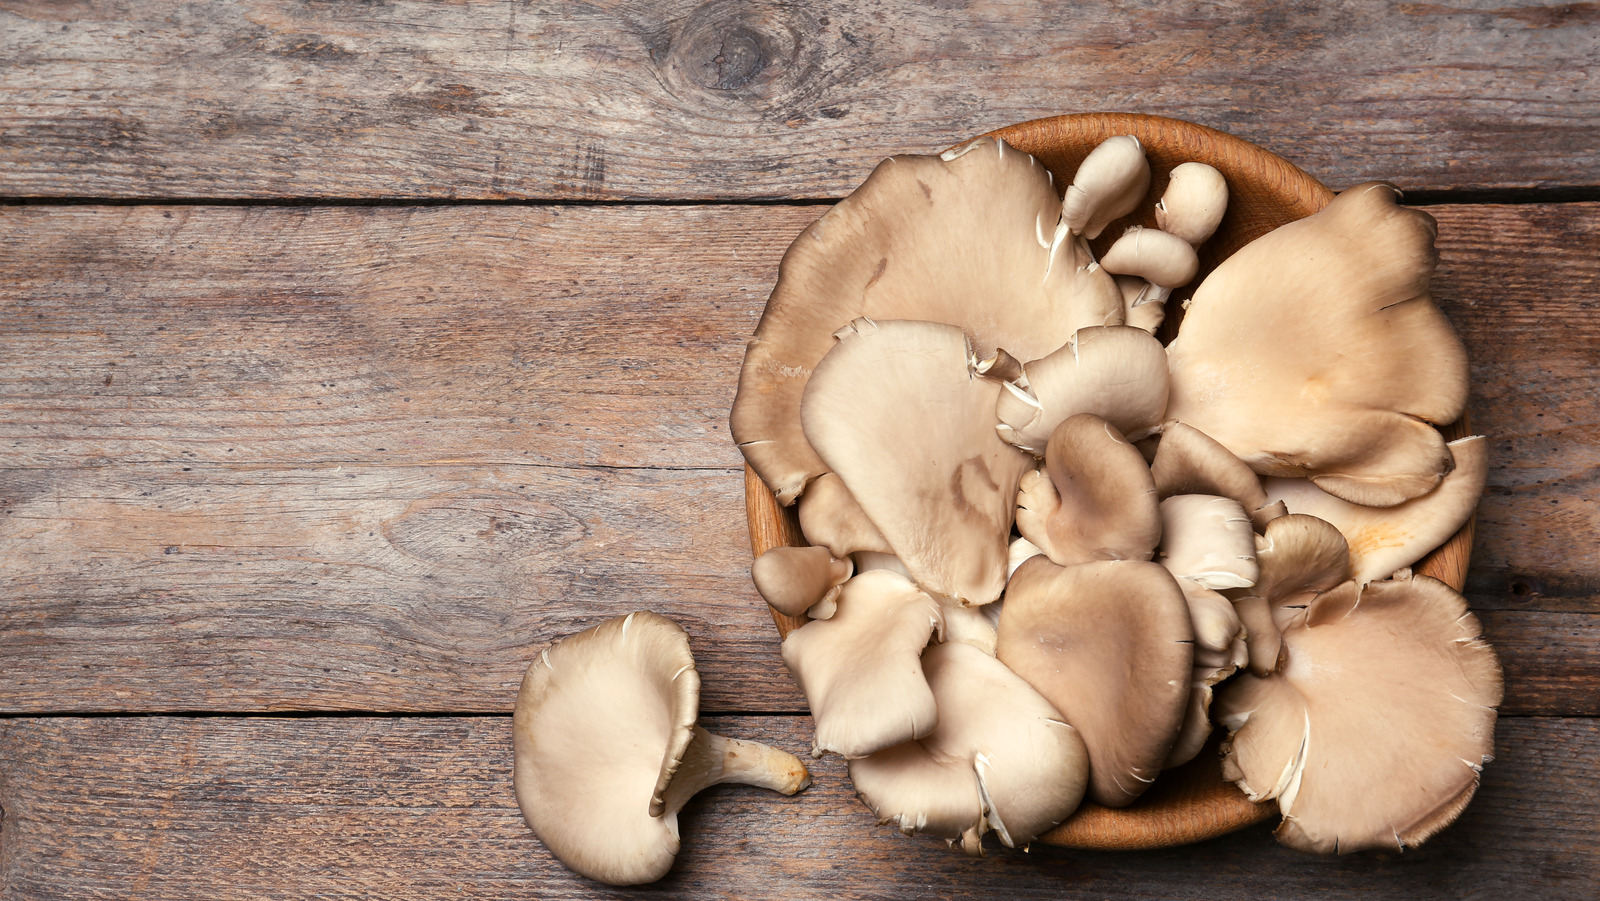 What You Should Know About Eating Raw Oyster Mushrooms